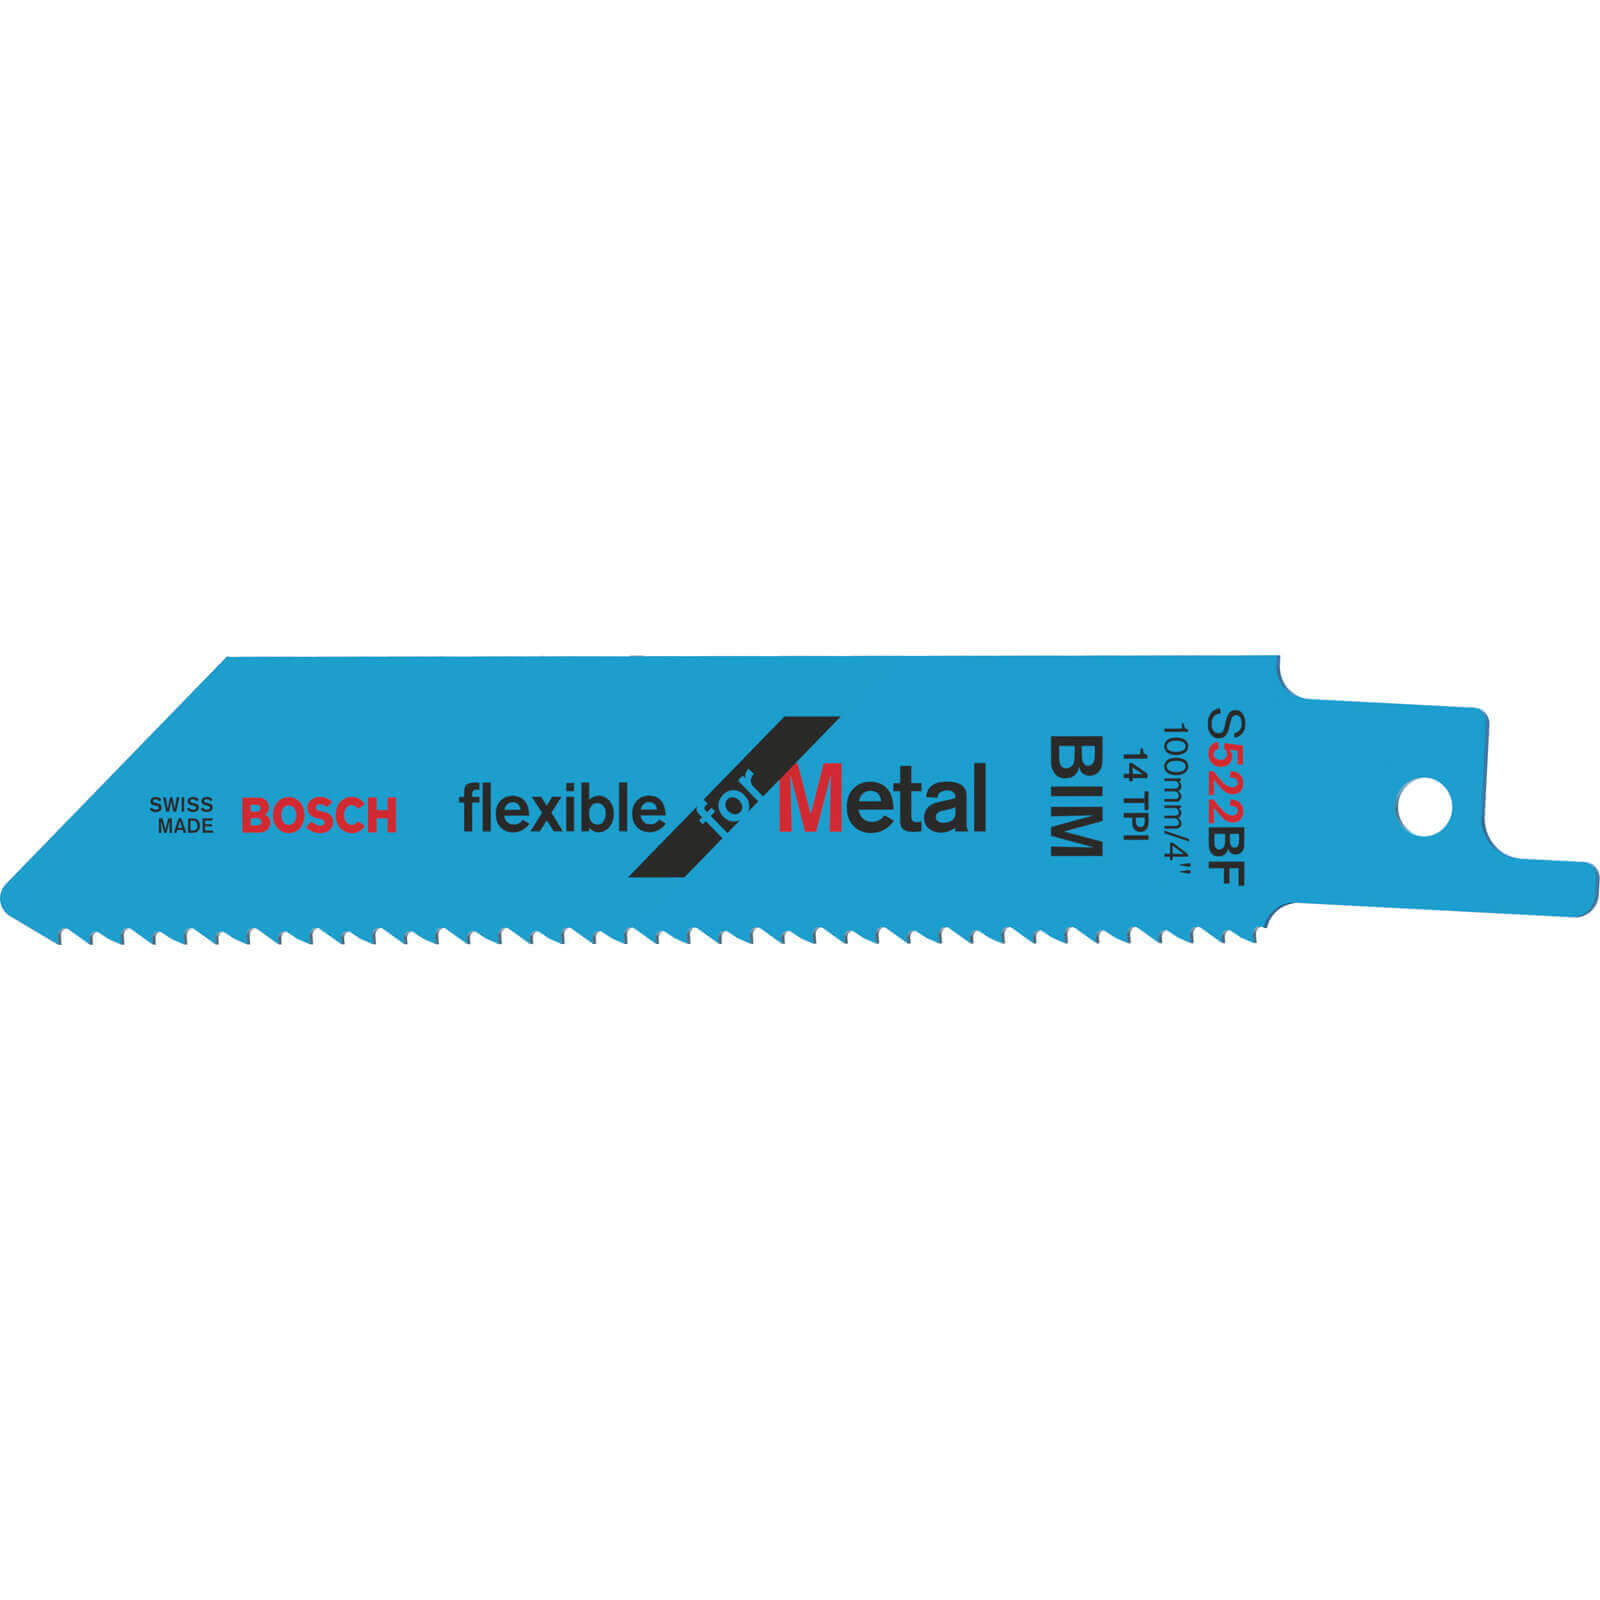 Bosch S522BF Metal Reciprocating Sabre Saw Blades Pack of 5